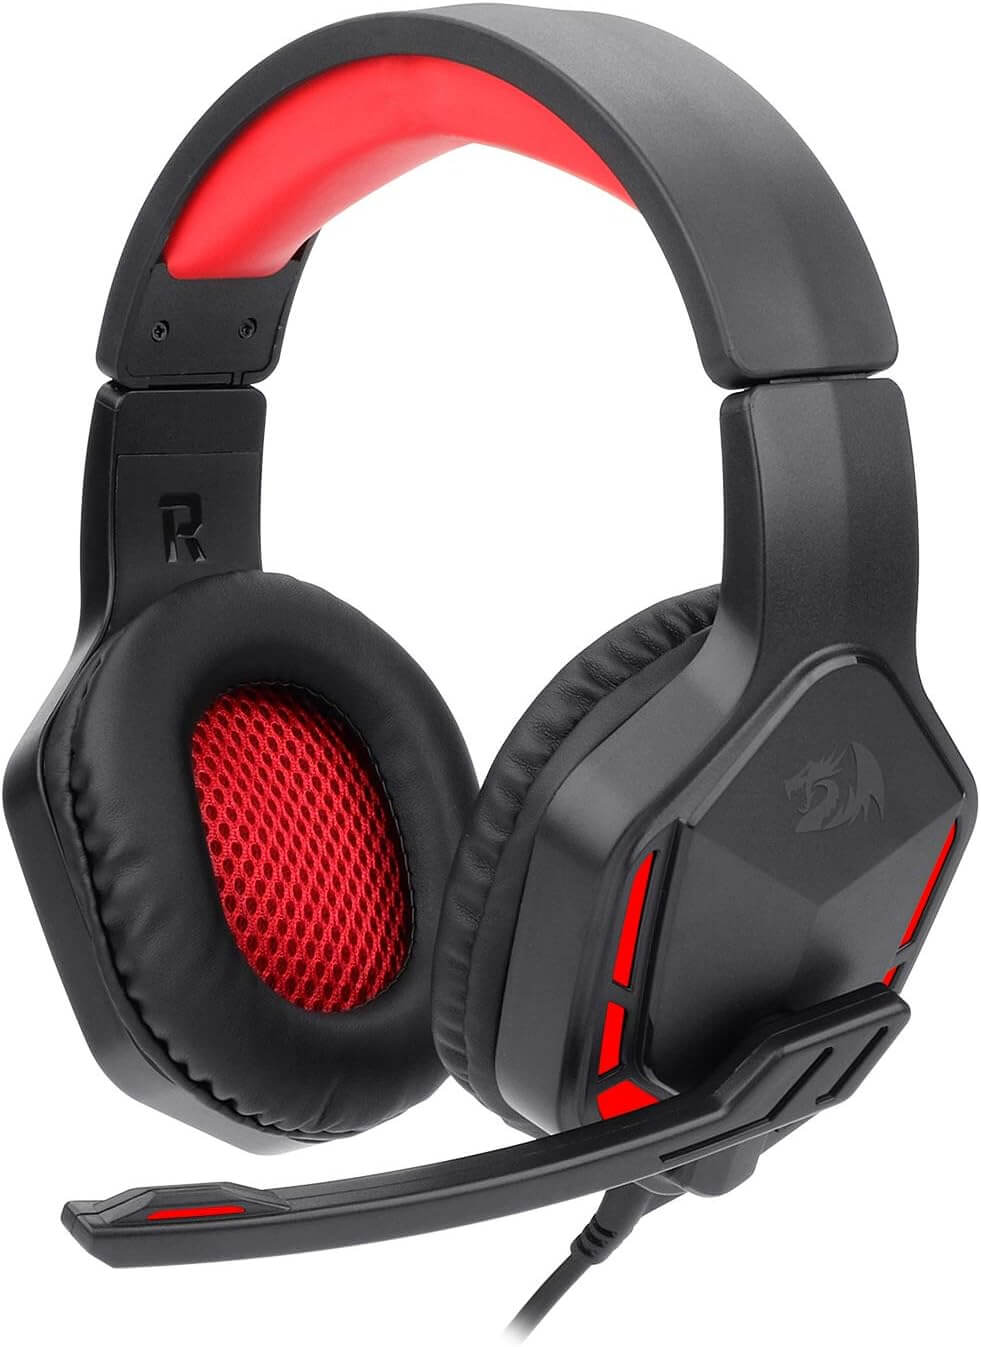 Redragon H220N Themis 2 Wired Gaming Headset, Stereo Surround-Sound, Noise Cancelling Over-Ear Headphones with Mic, Volume Control, Red LED Light, Compatible with PC, PS4/3, Xbox One and Nintendo Switch